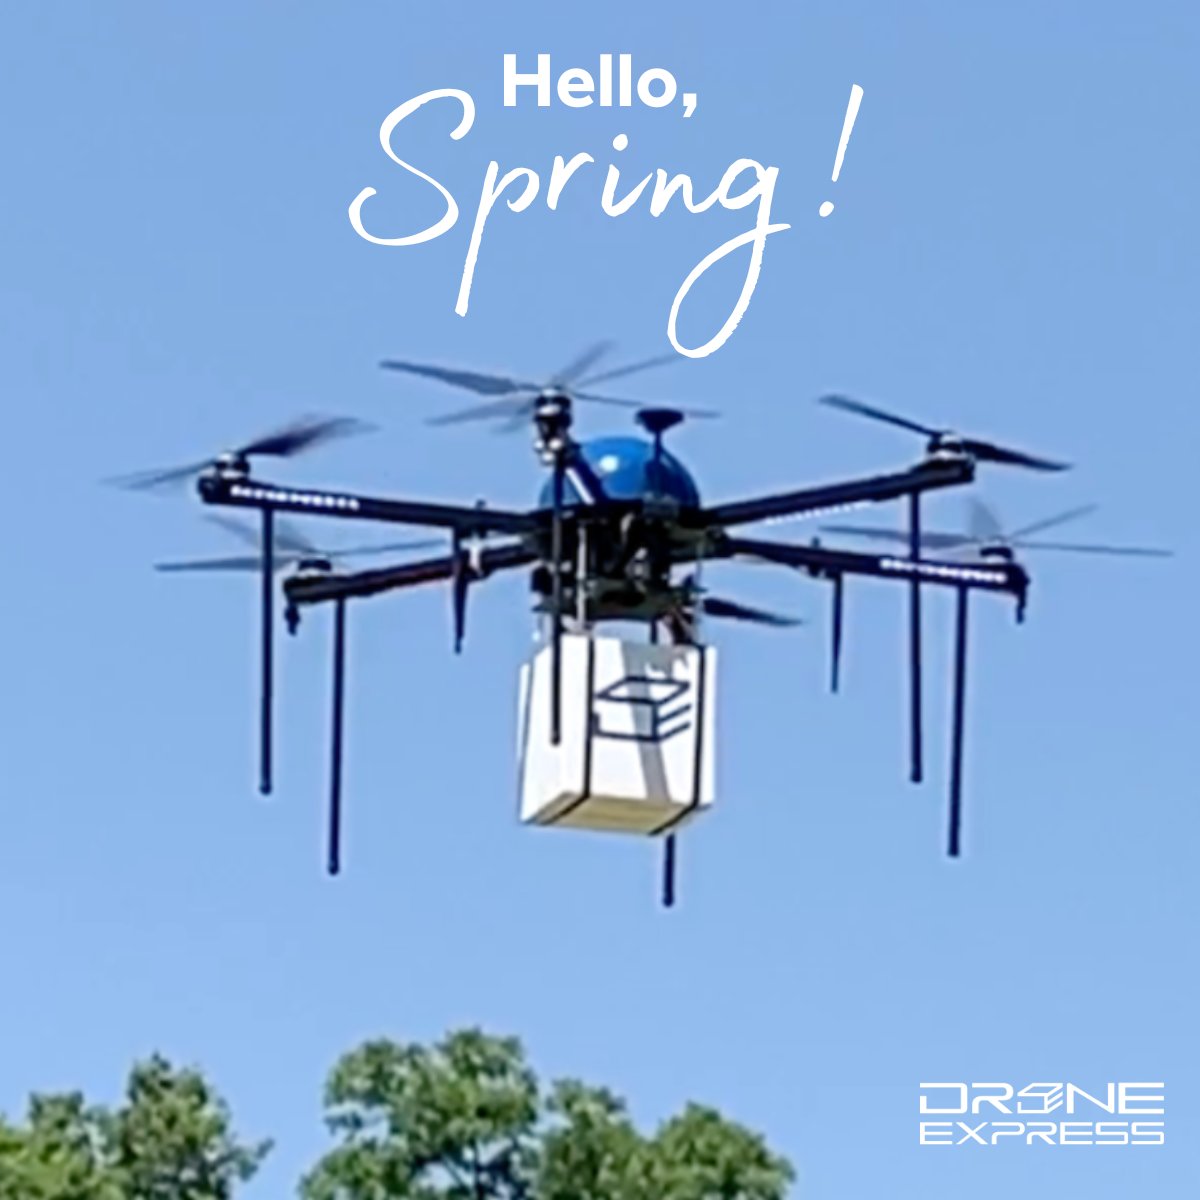 Happy #FirstDayOfSpring ☀️💐 As the warm weather approaches, so do opportunities for expanding #dronedelivery services. 📦 Here's to a season filled with growth and success! Let's connect! Learn more lnkd.in/efgK8k7k or info@droneexpress.com! #flydroneexpress #drones